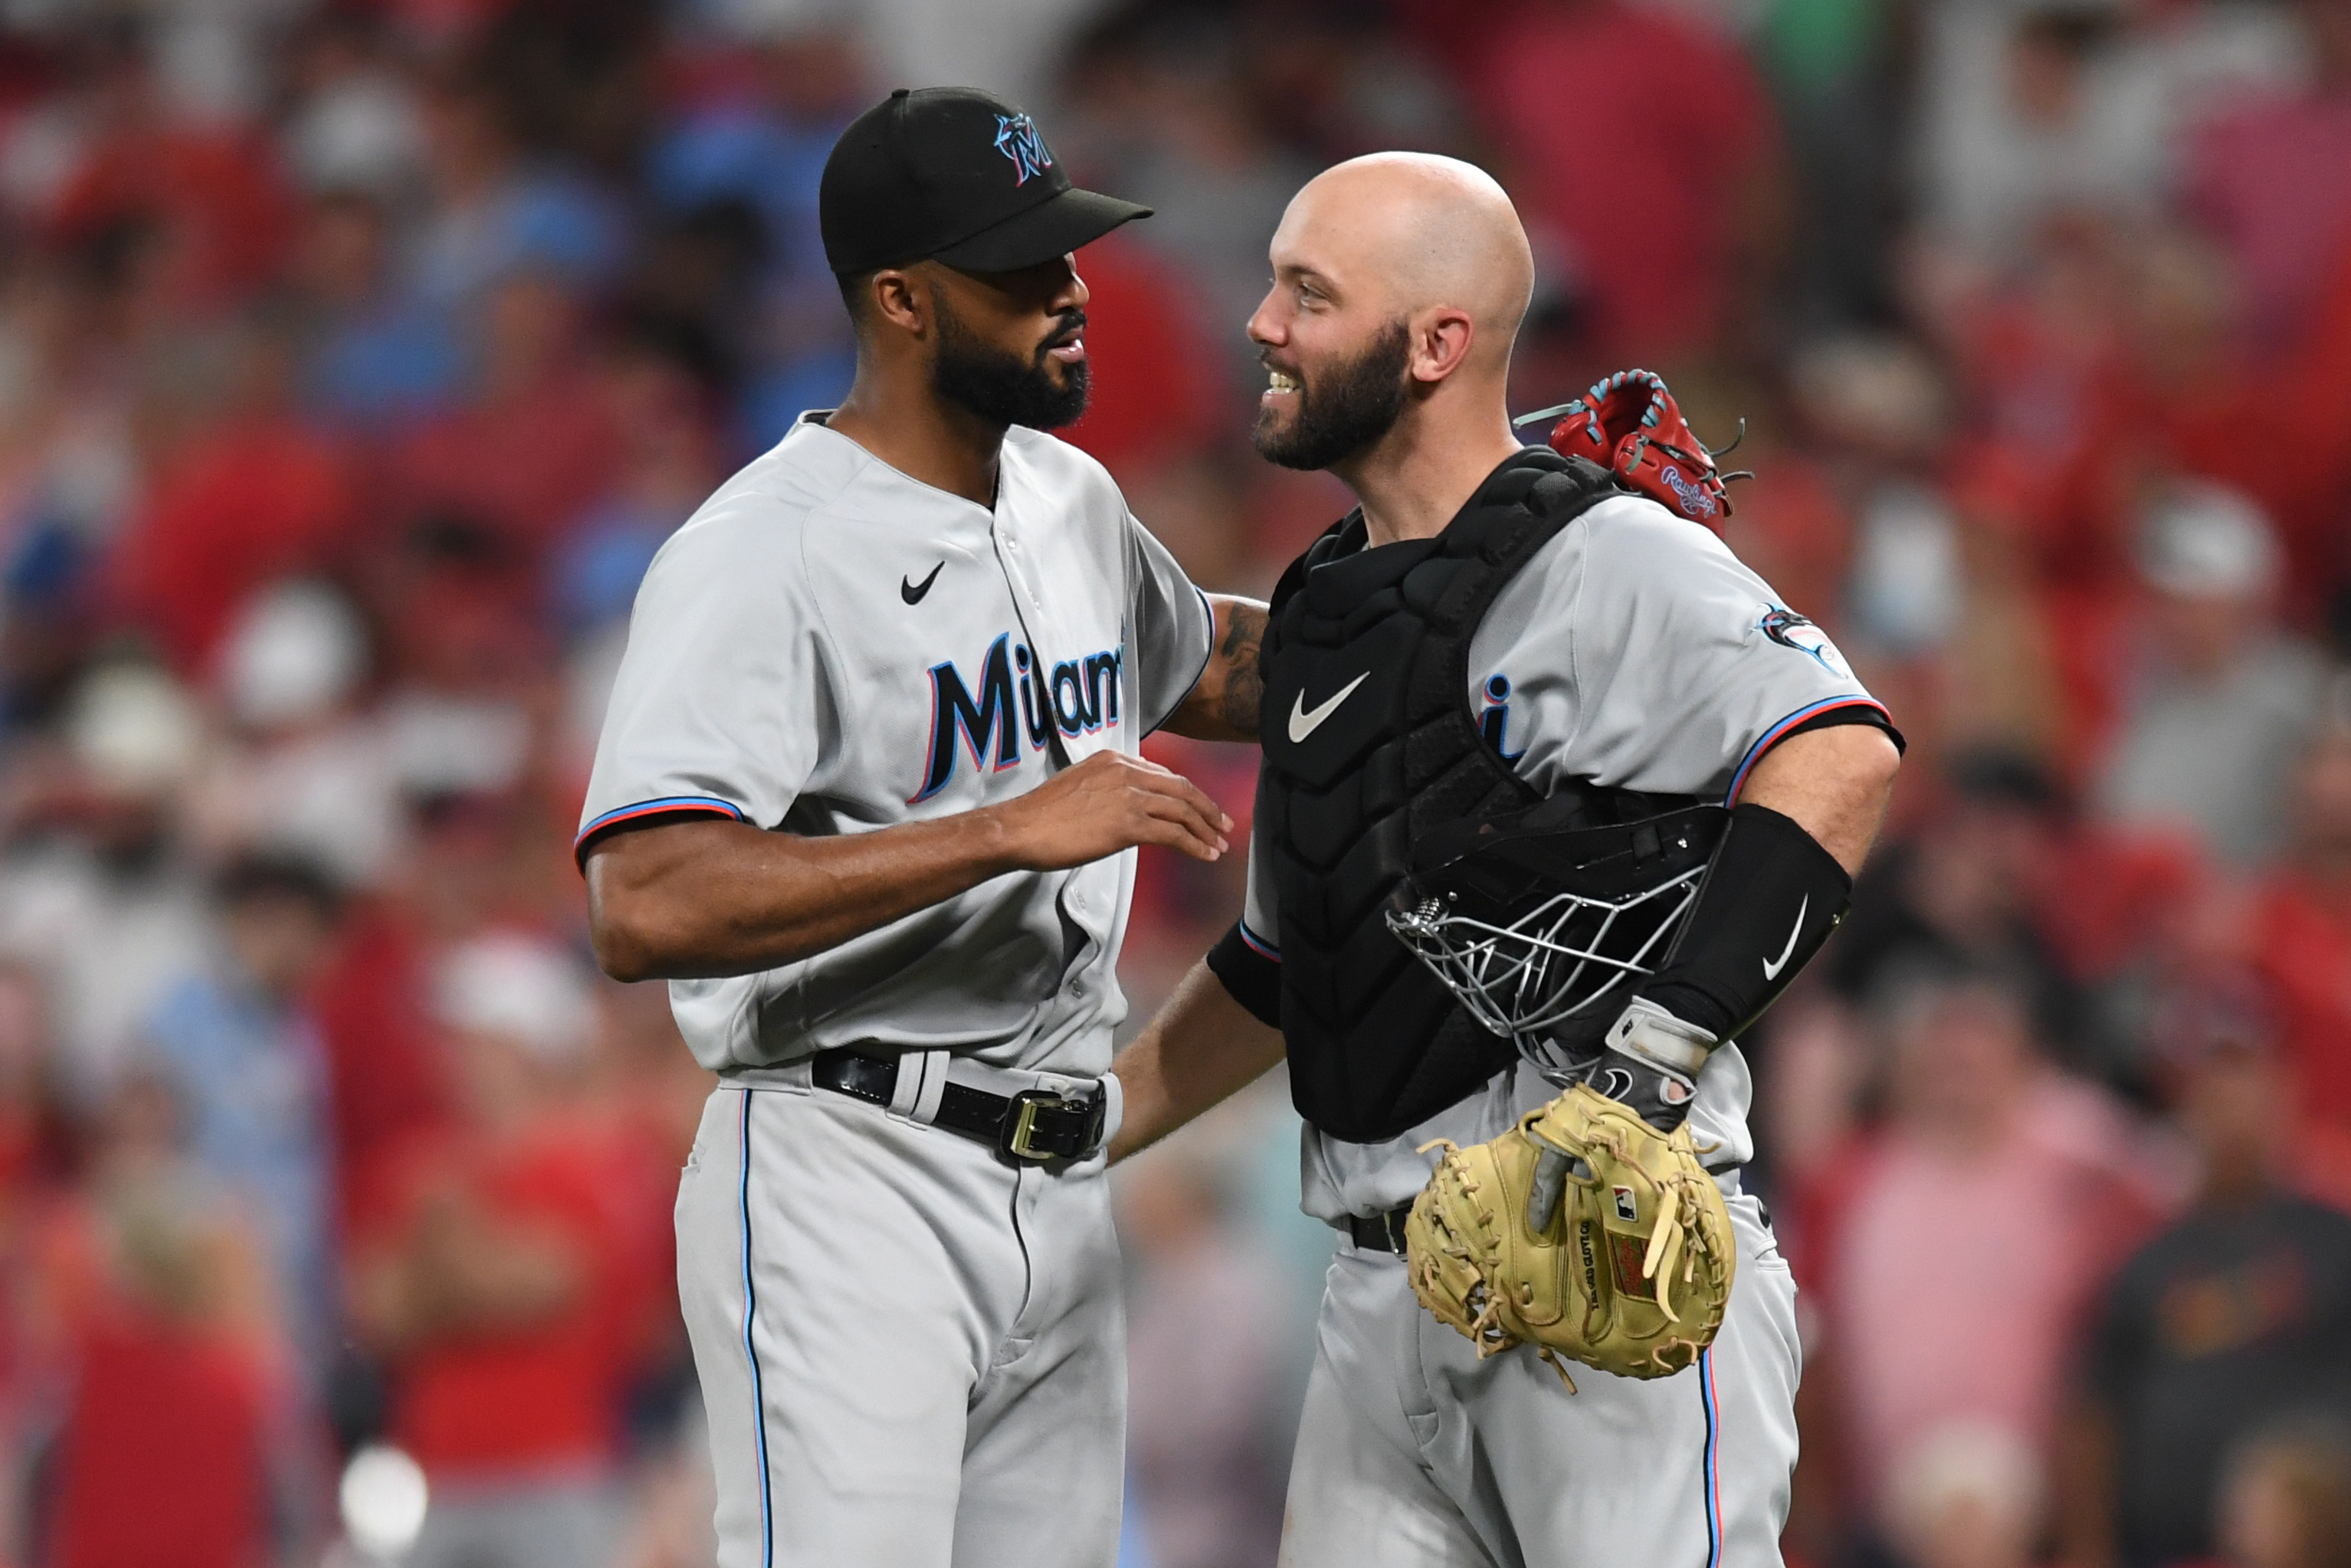 Sandy Alcantara #22 and Jacob Stallings #58 of the Miami Marlins celebrate after defeating the St. Louis Cardinals 4-3 at Busch Stadium on June 29, 2022 in St Louis, Missouri.